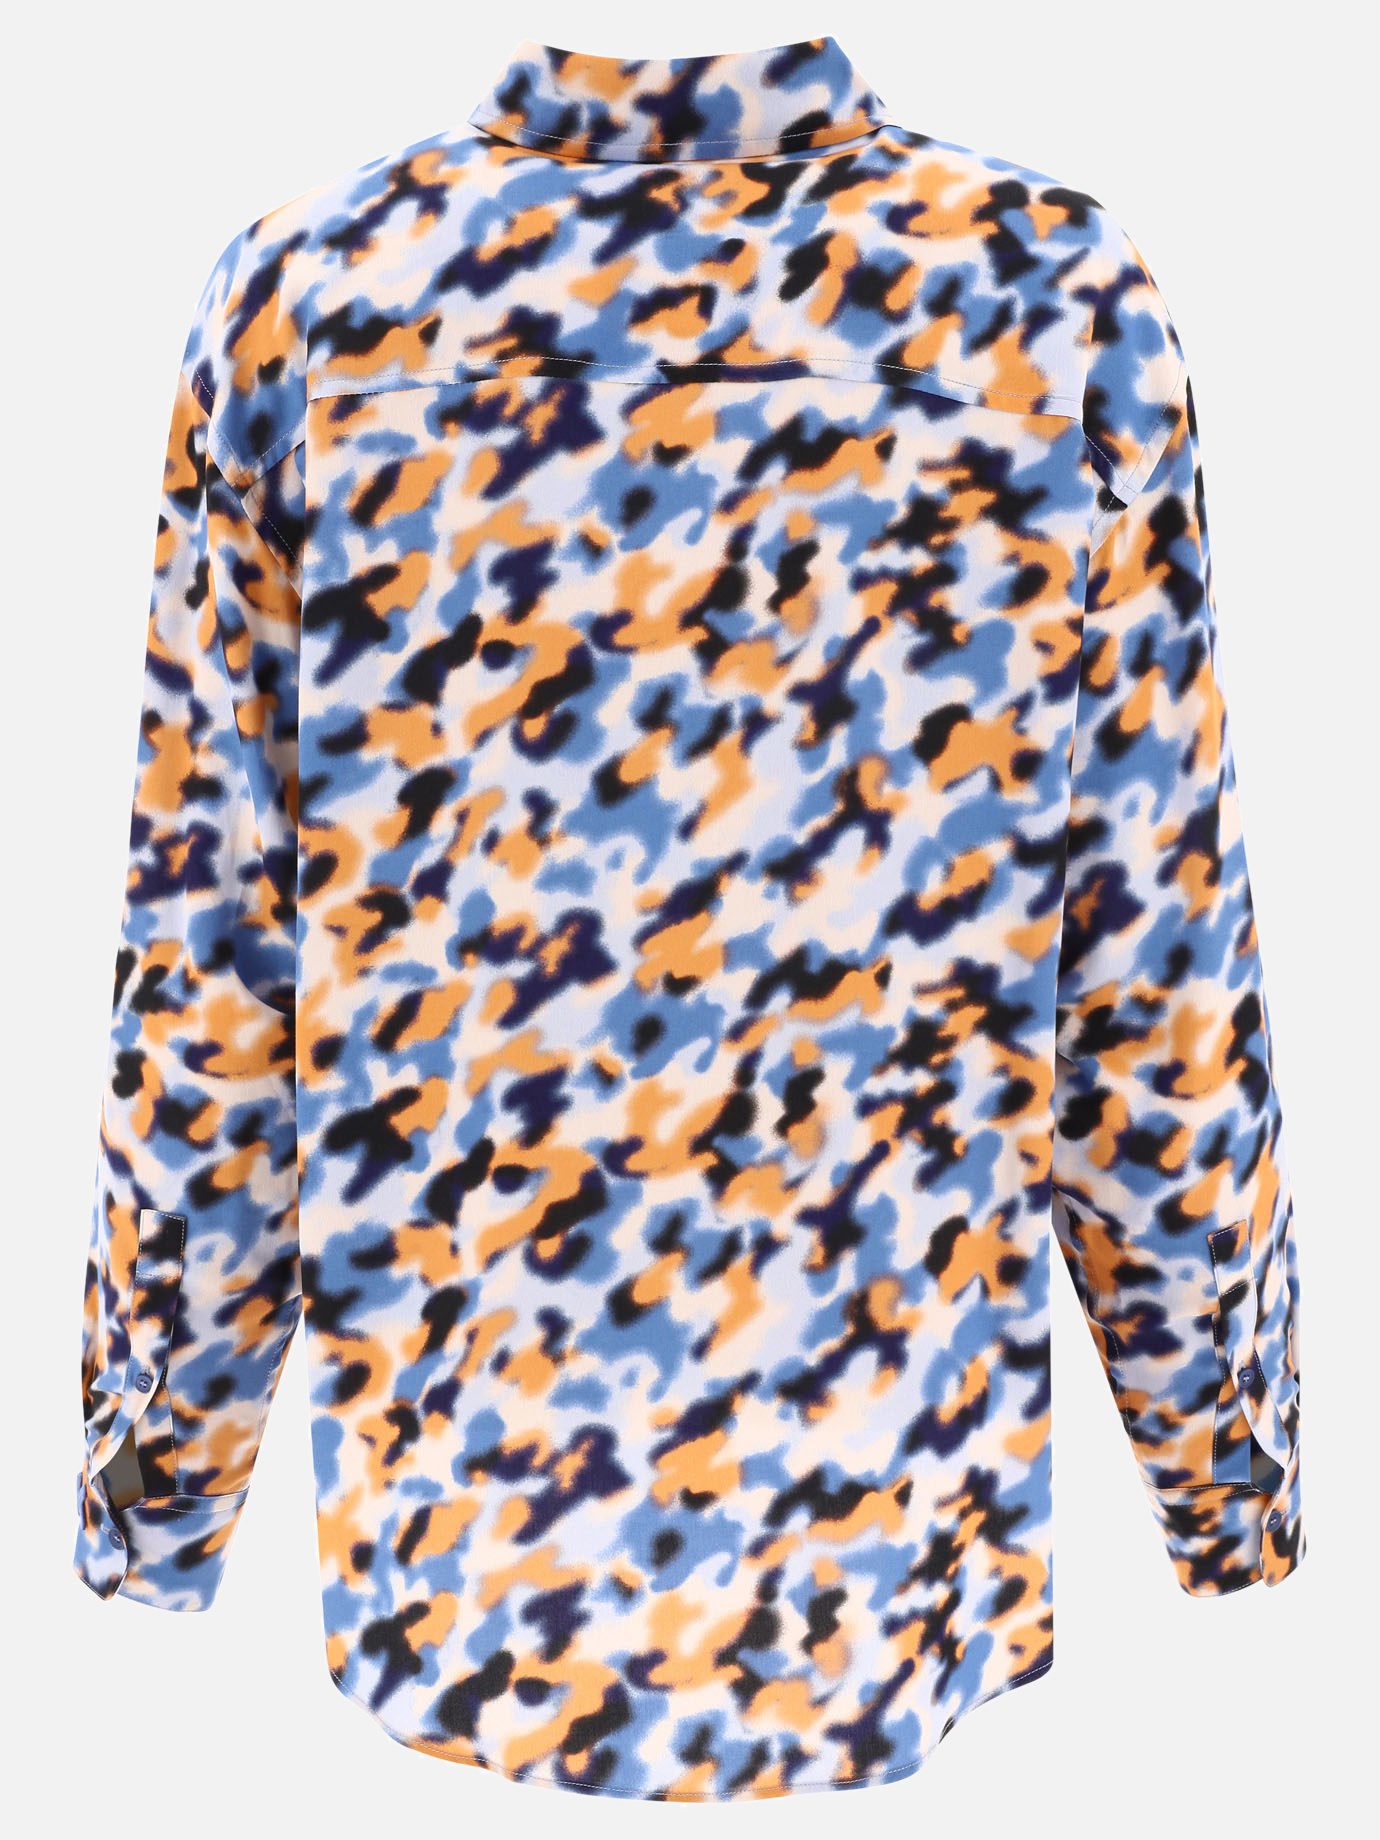 Camouflage shirt by Kenzo